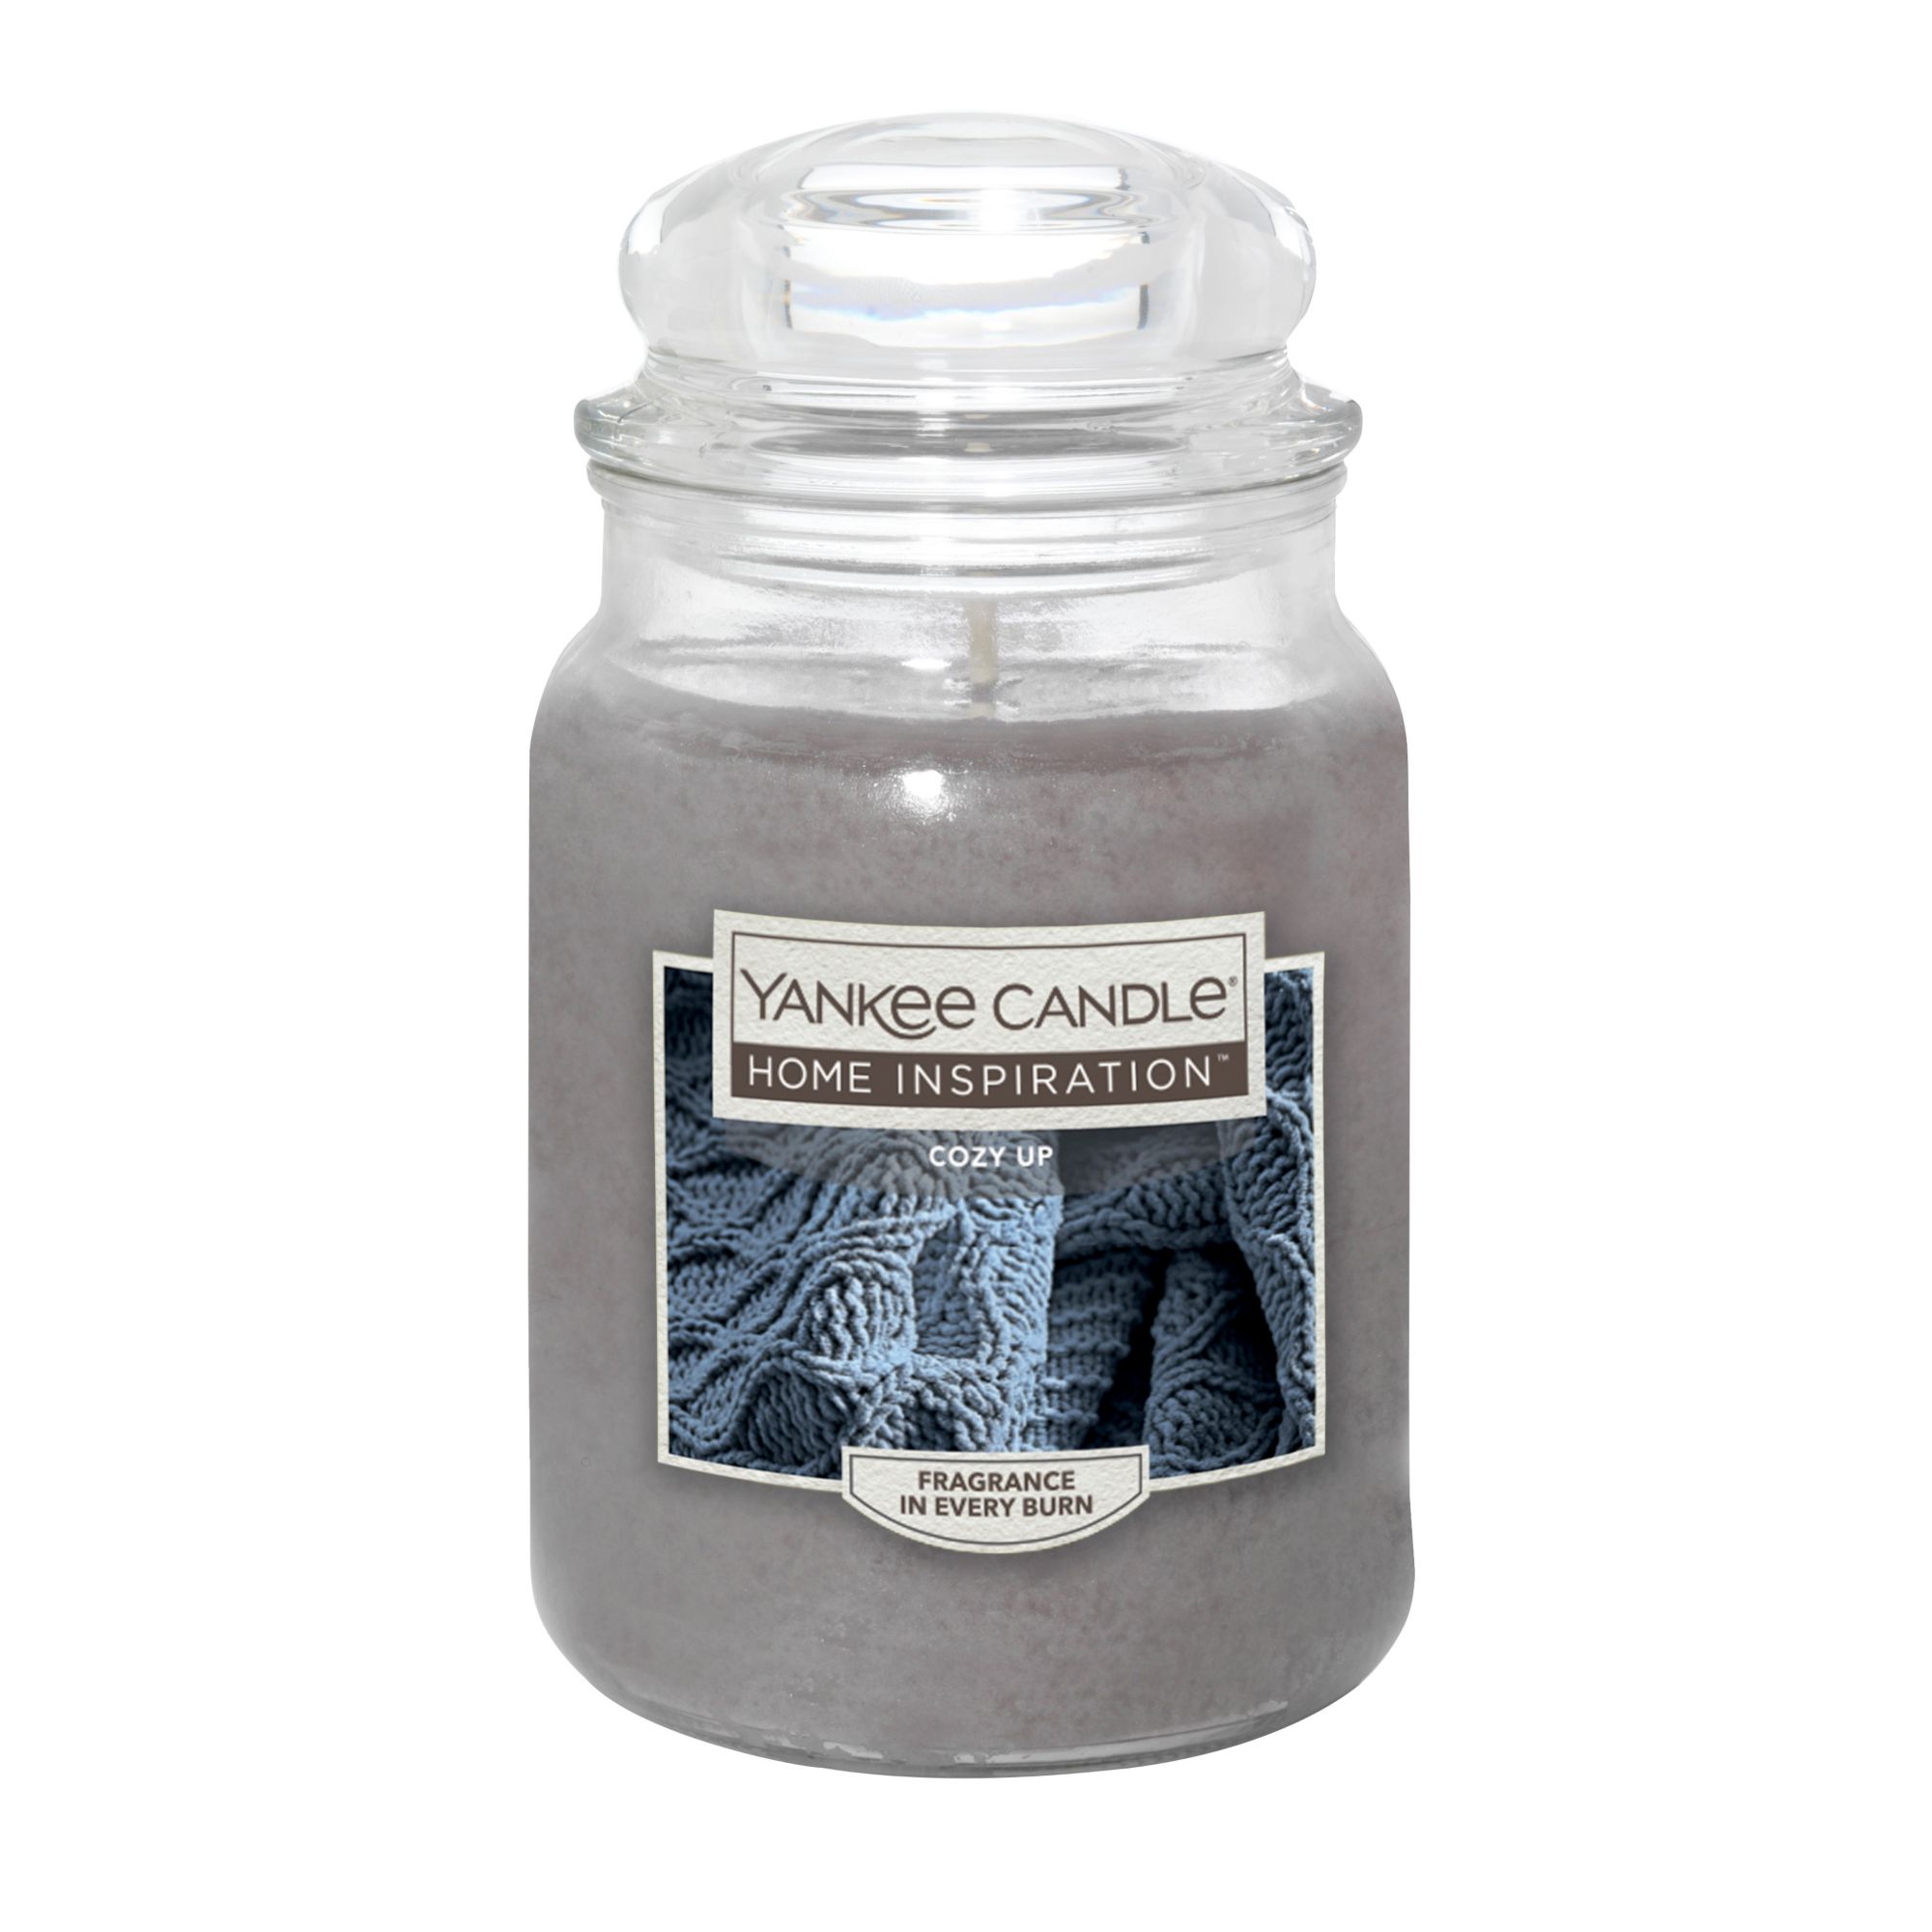 Yankee Candle Home Inspiration Cozy Up Candle, 19 oz.